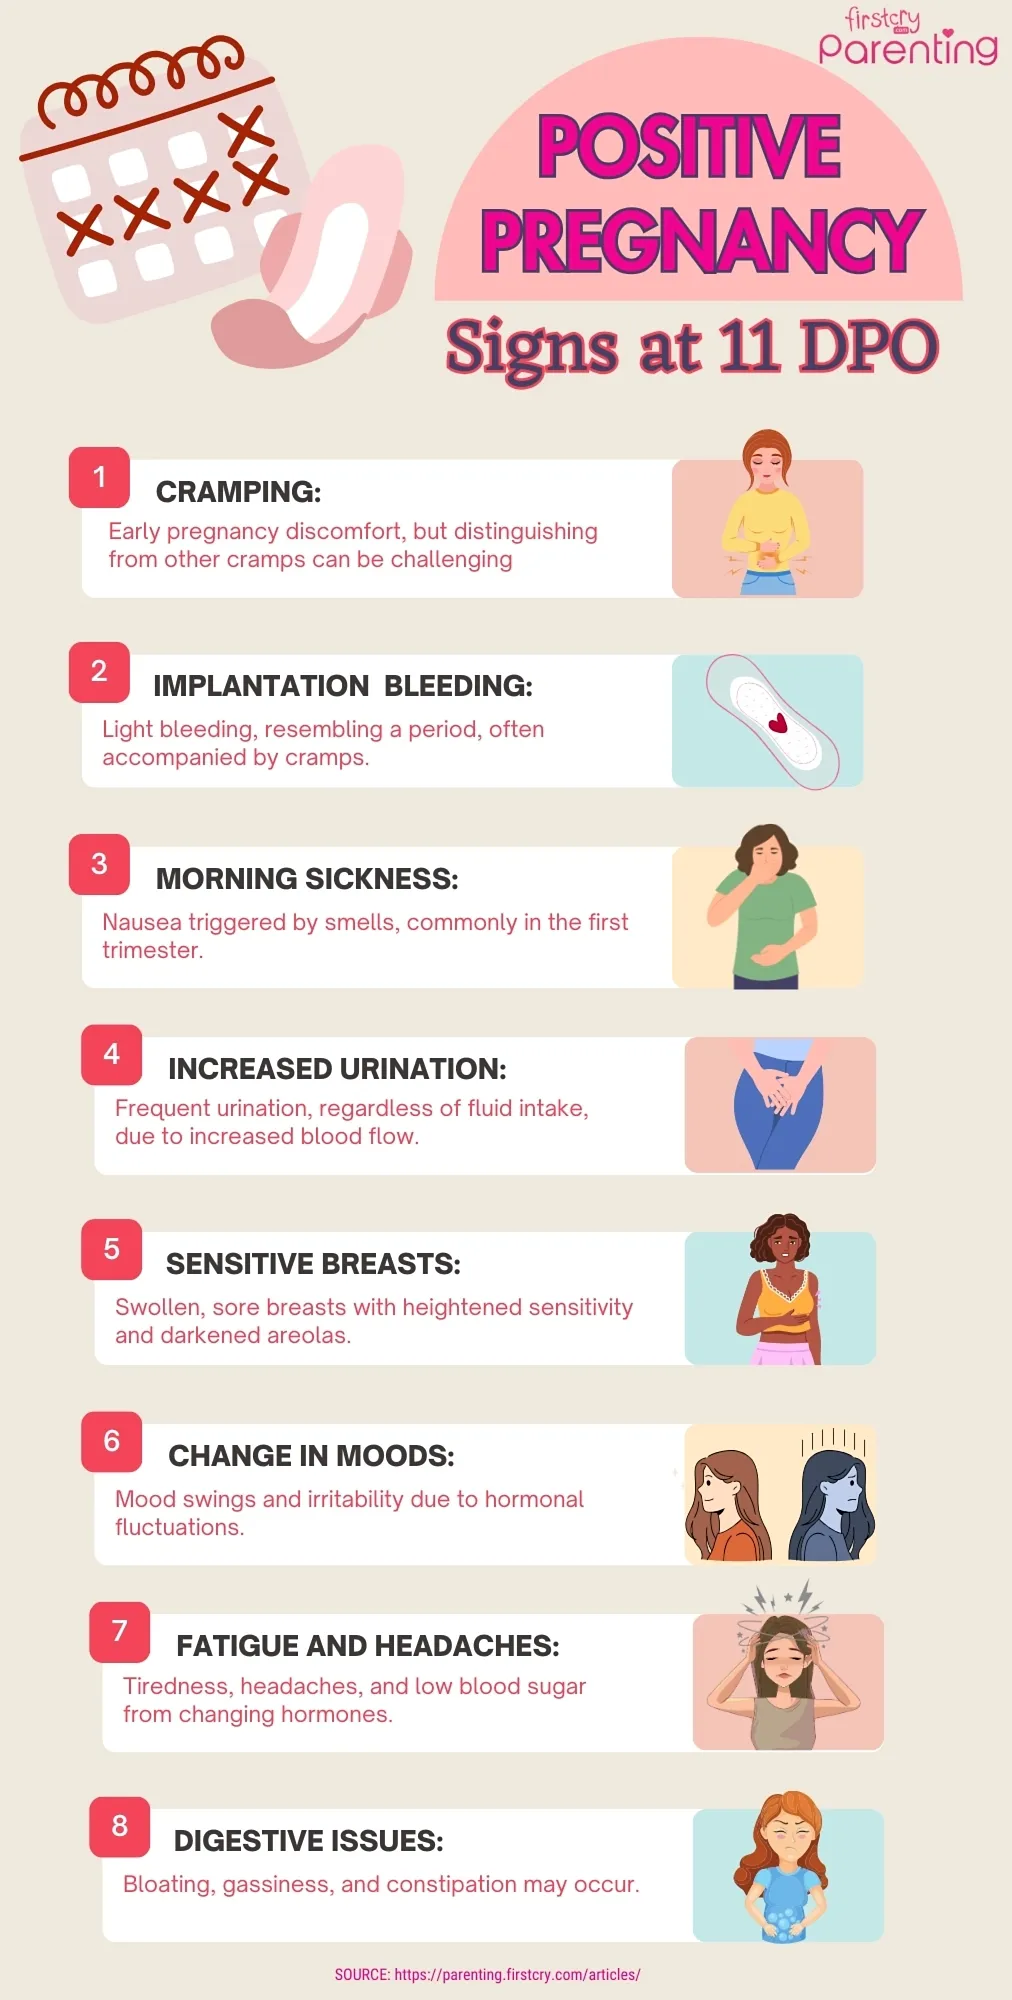 Positive Pregnancy Signs at 11 DPO - Infographic